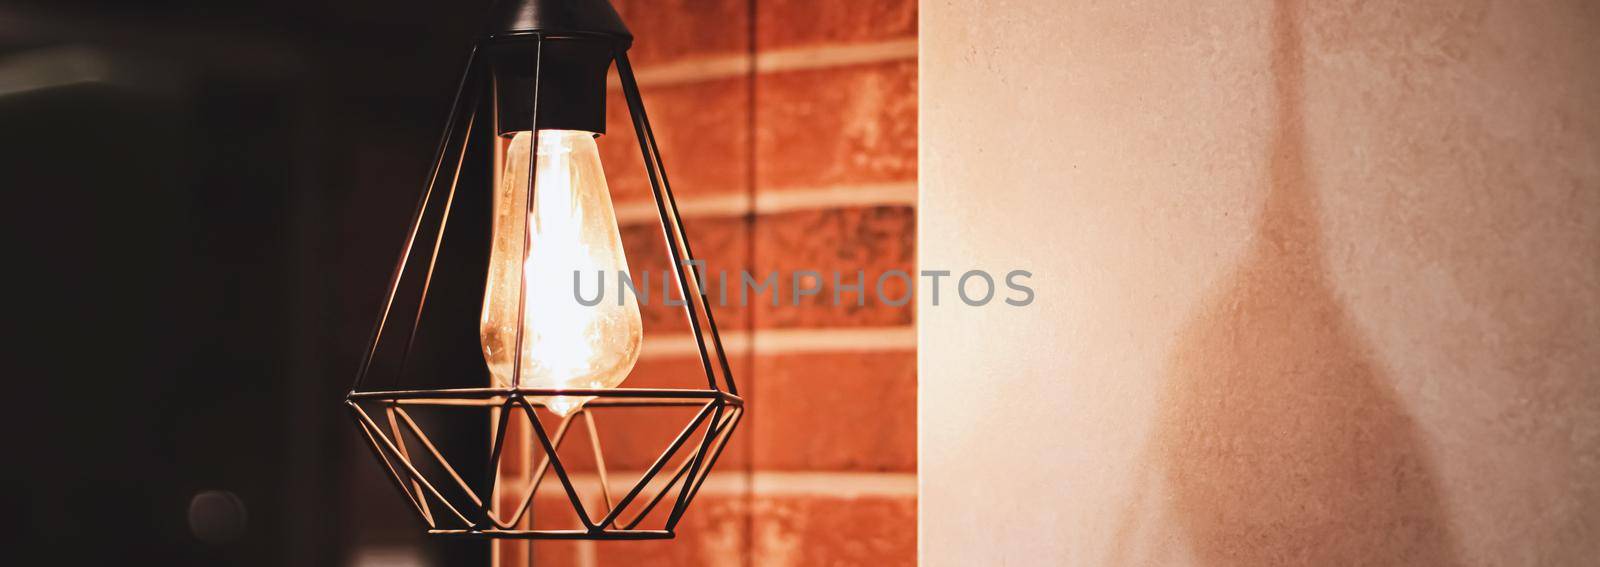 Pendant industrial lamps in loft interior with dark brick walls, modern design and home decor by Anneleven